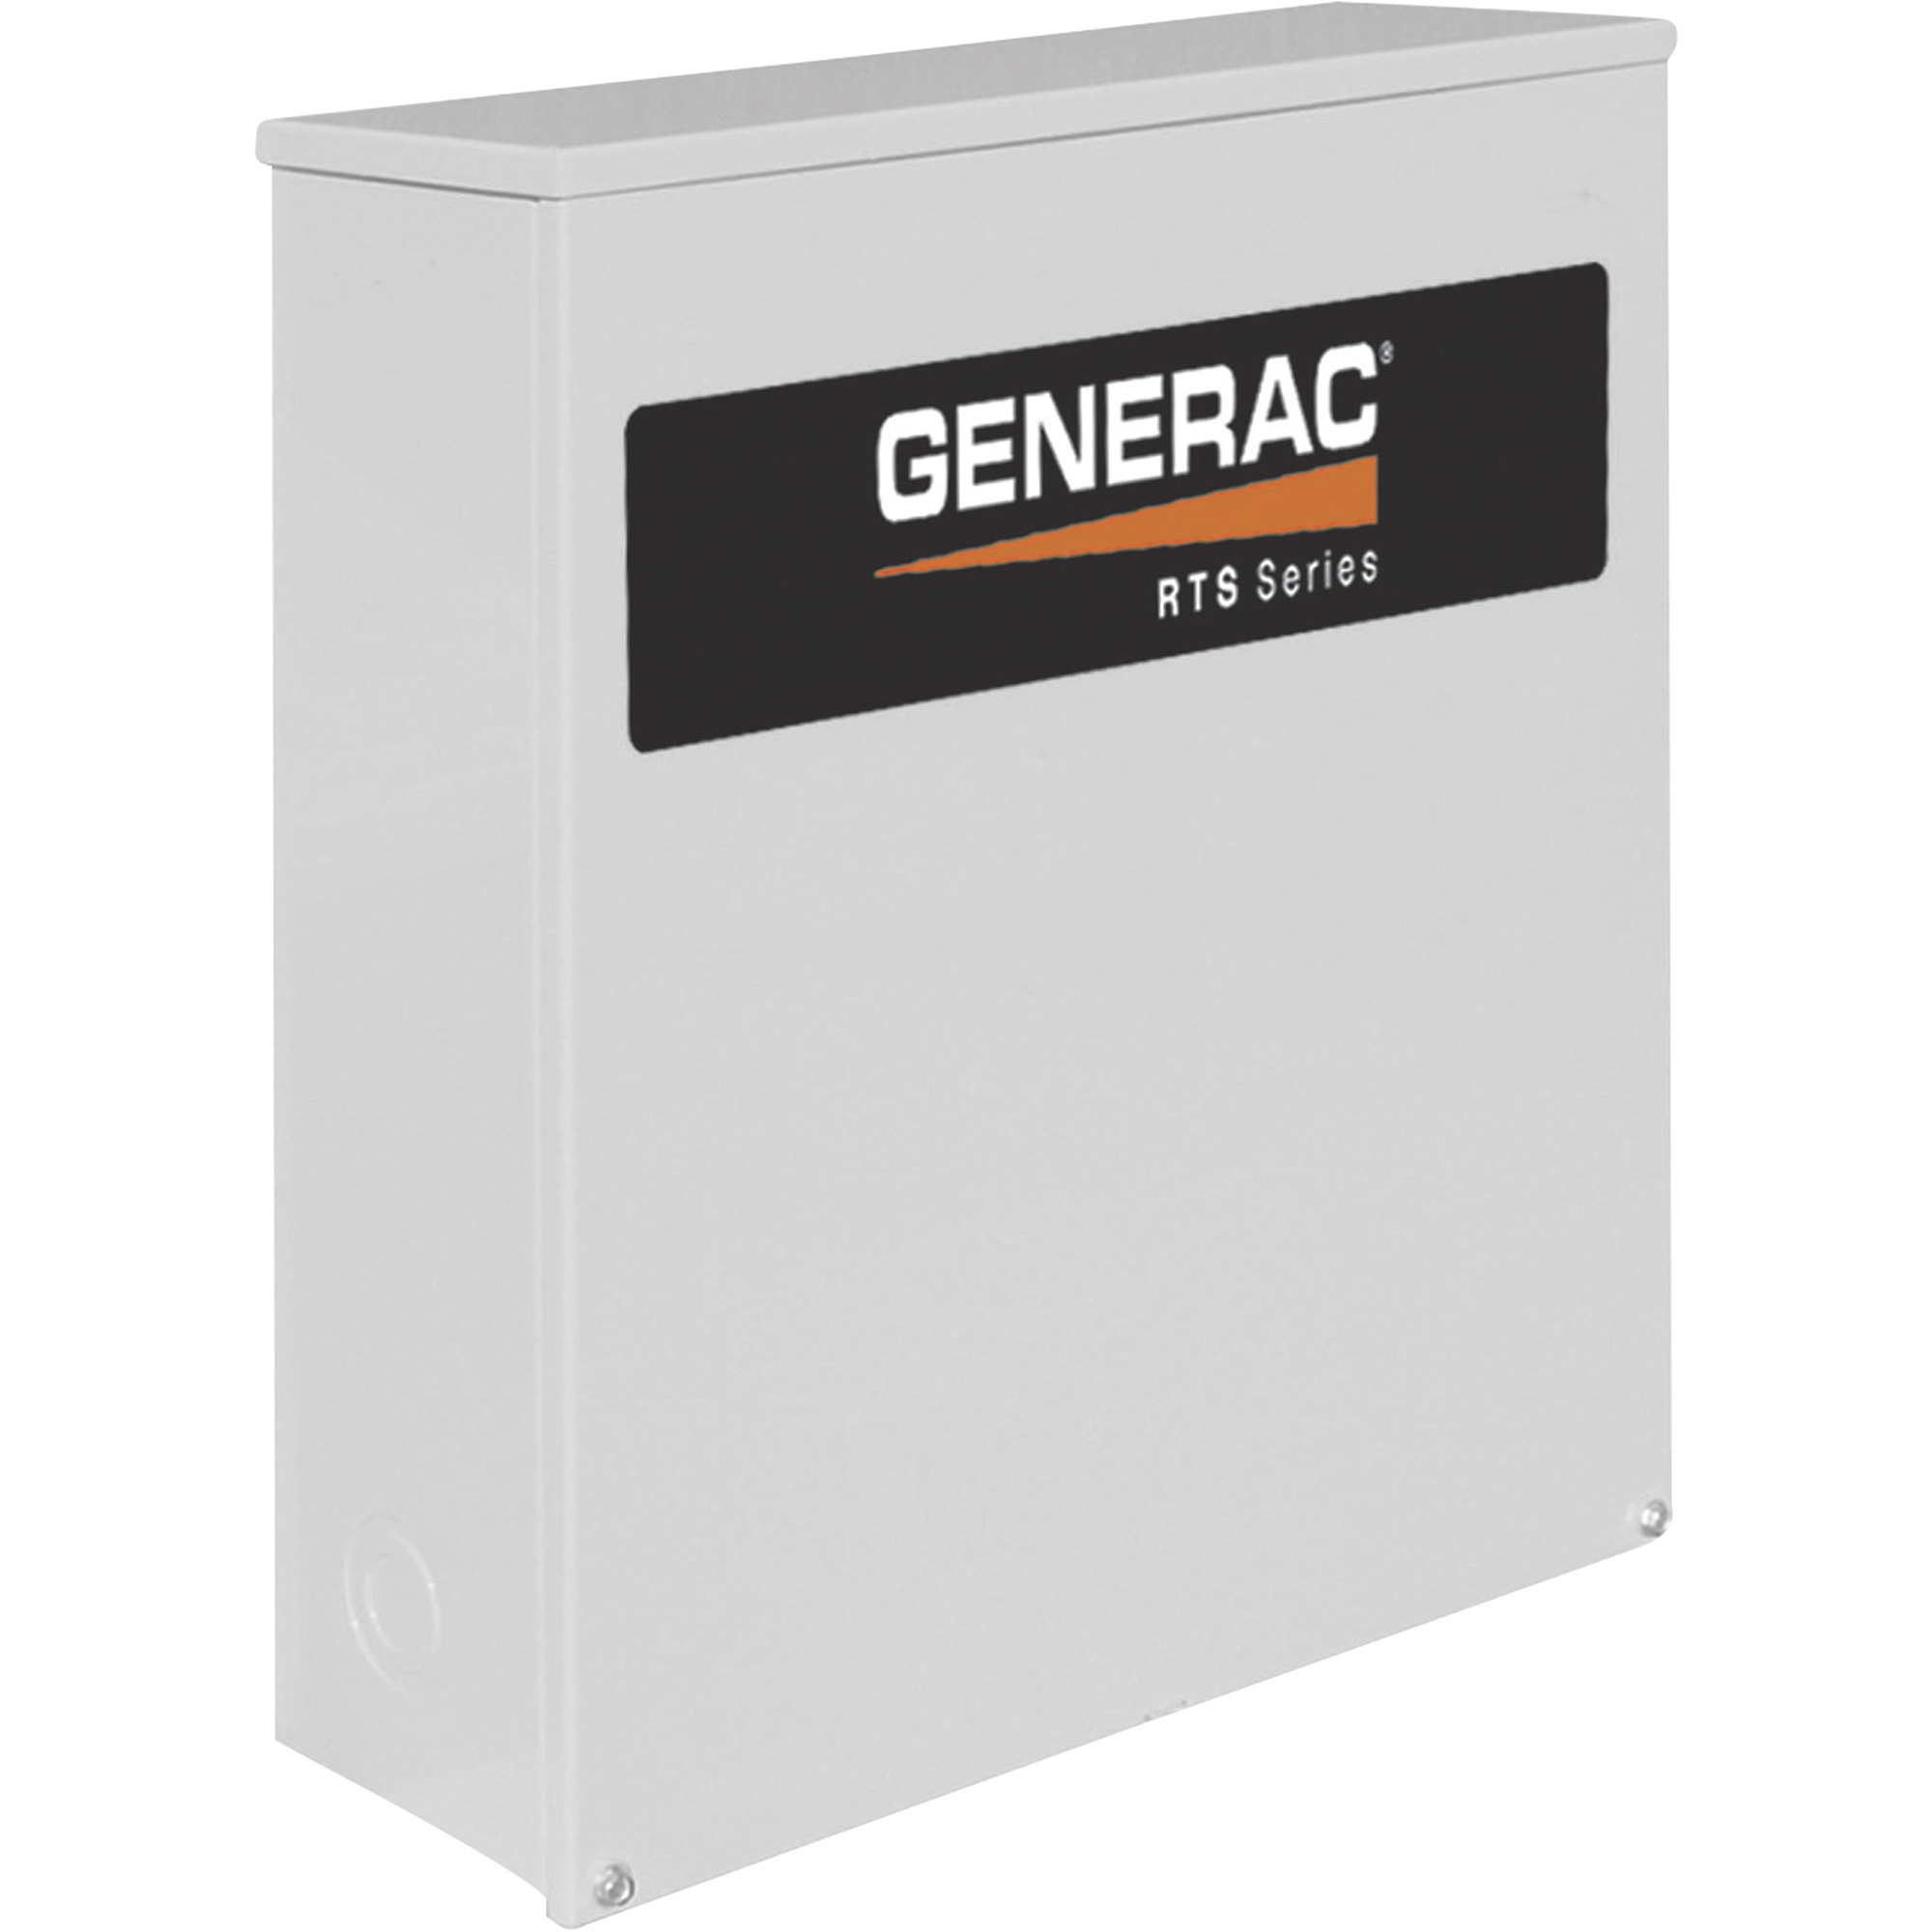 Generac RTS Automatic Generator Transfer Switch, 200 Amp, 120/208 Volts, 3 Phase, Type N, Model RTS-N-200G3